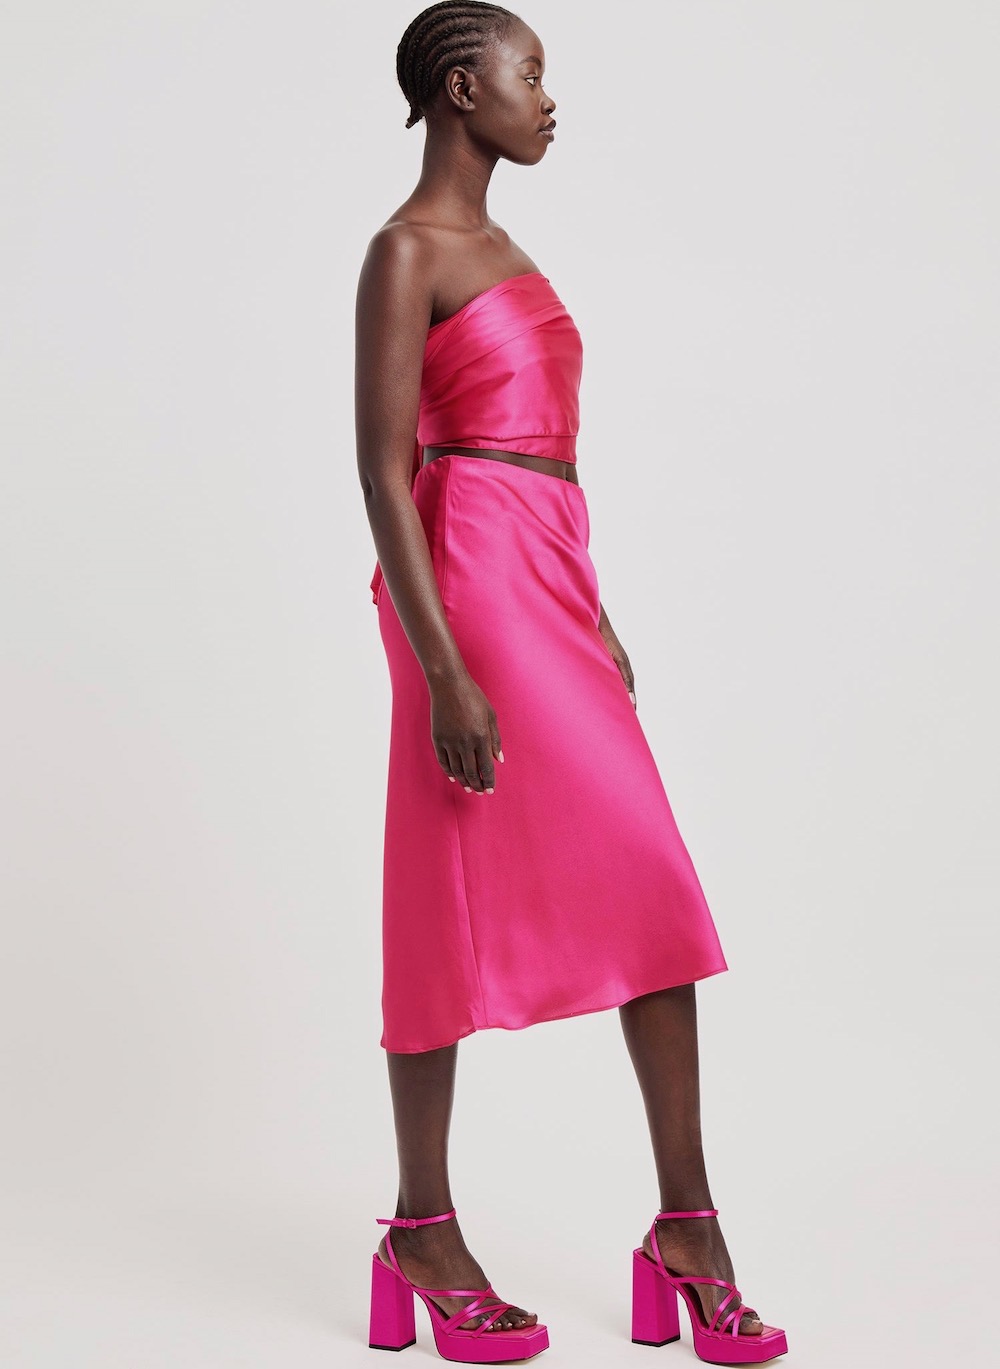 Hot Pink Is Summer's Hottest Hue - theFashionSpot